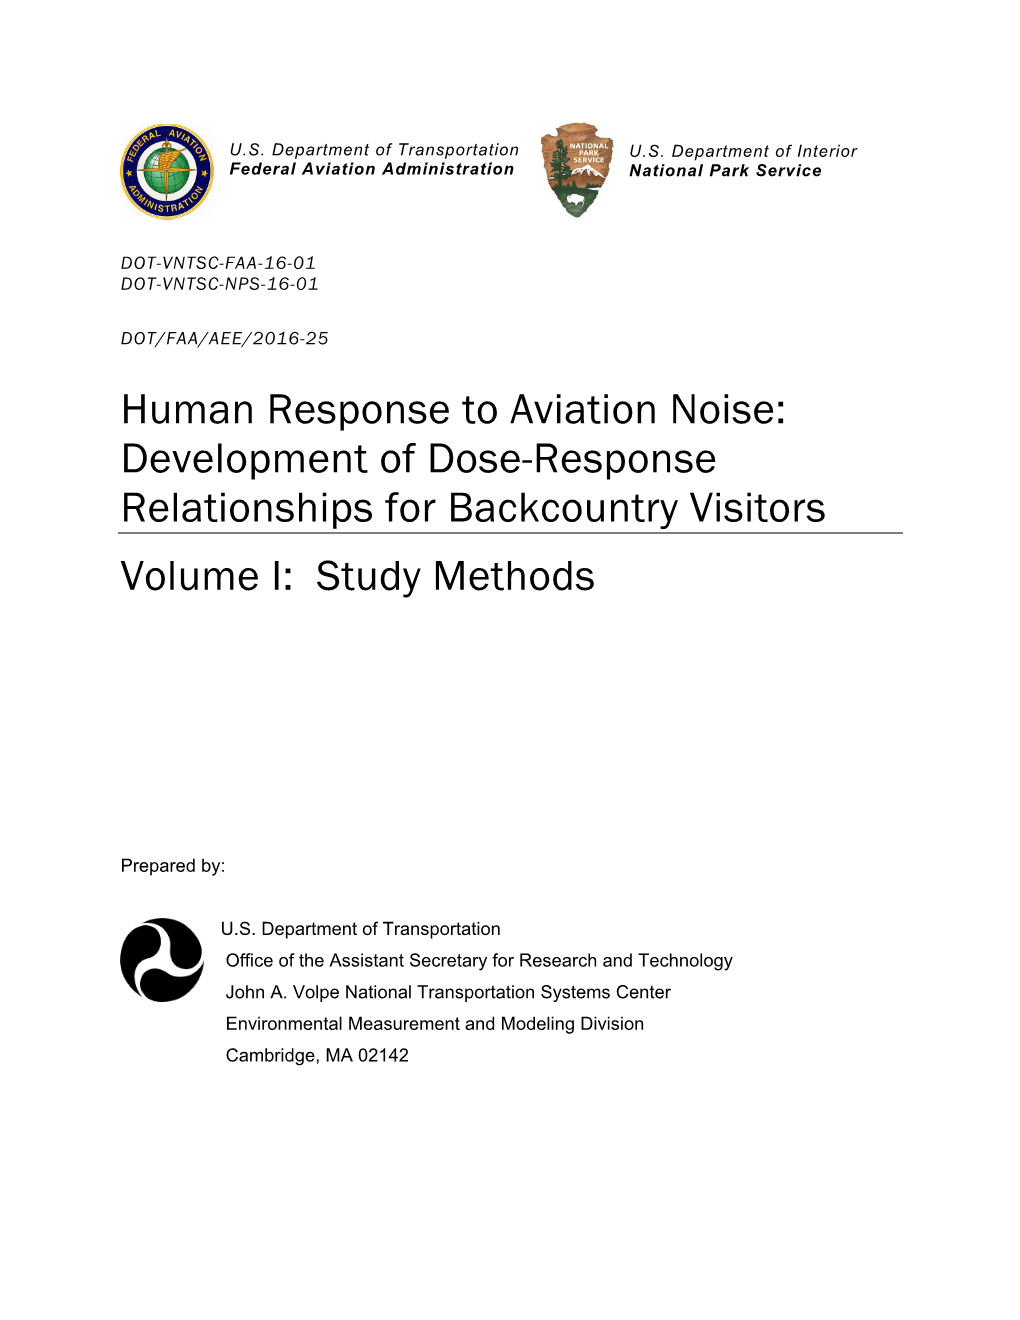 Human Response to Aviation Noise: Development of Dose-Response Relationships for Backcountry Visitors Volume I: Study Methods